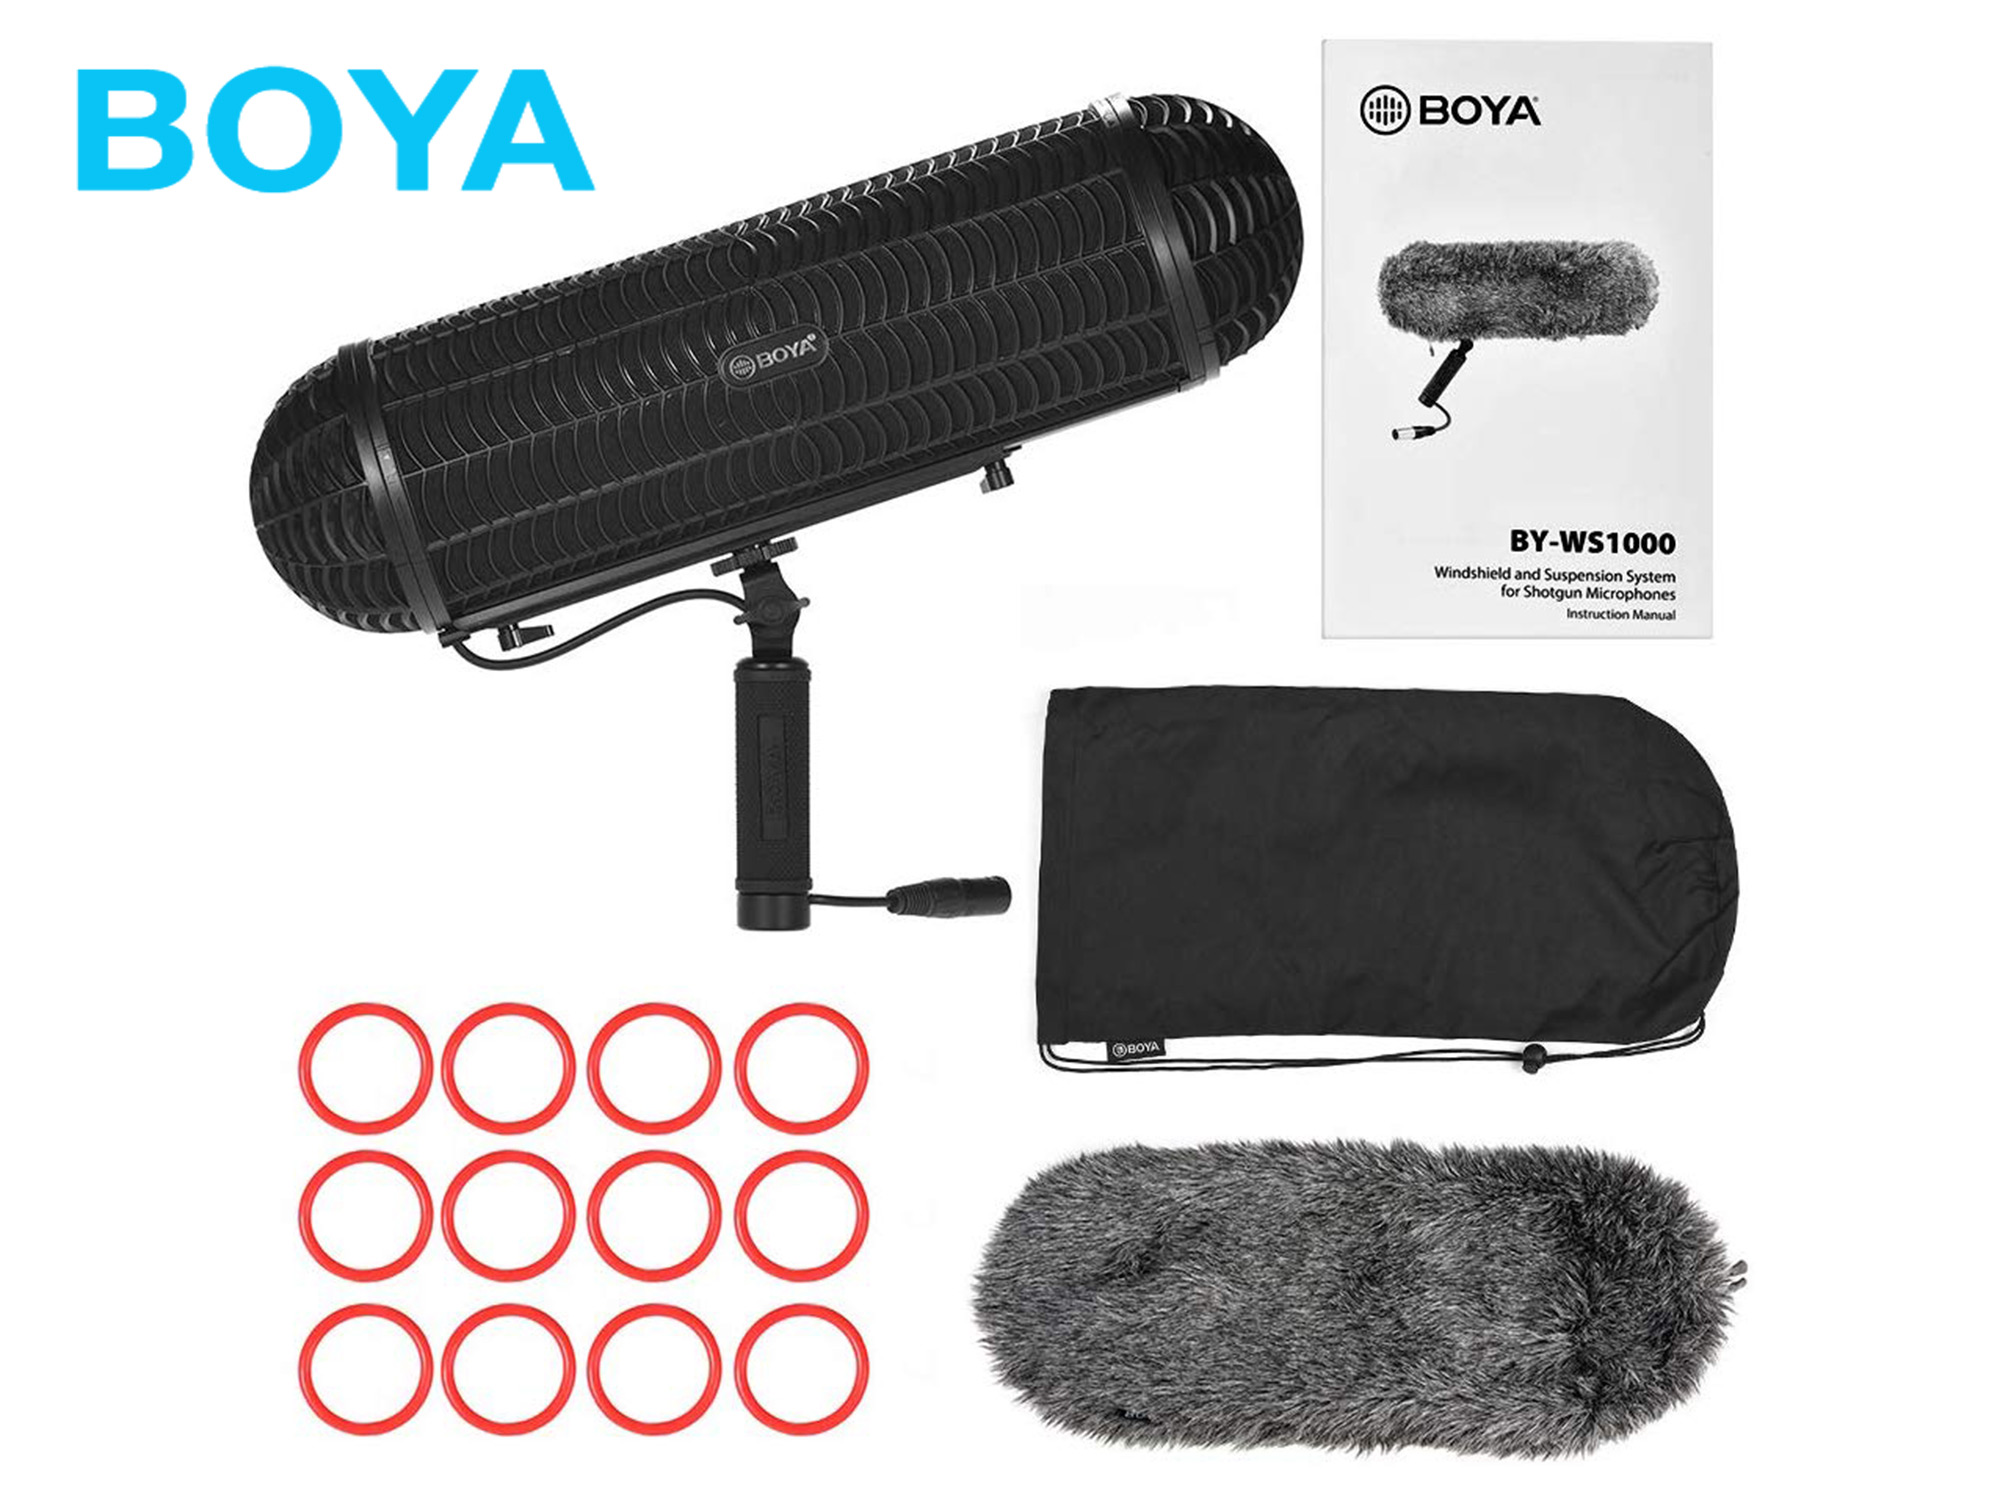 Boya BY-WS1000 Professional Windshield and Suspension System